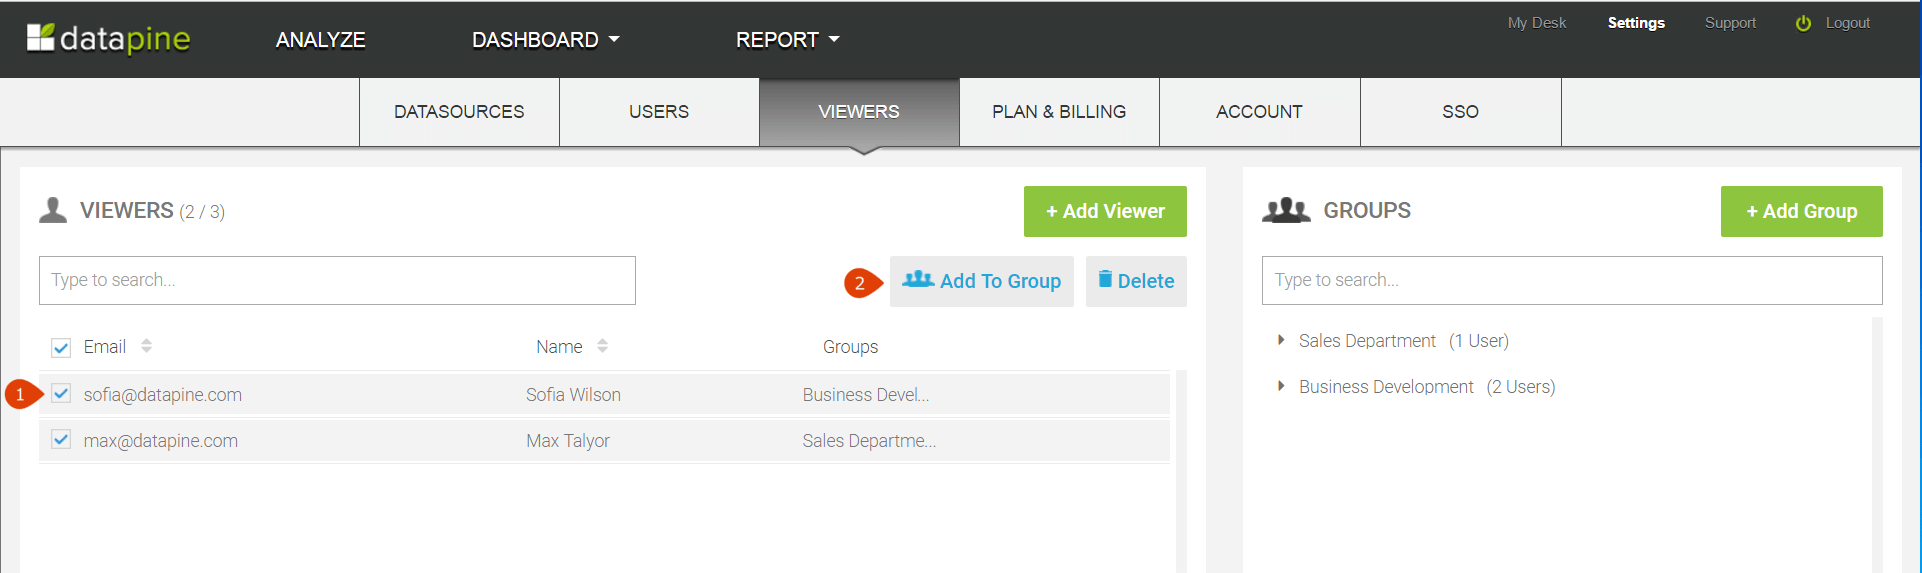 how to add multiple viewers to a group